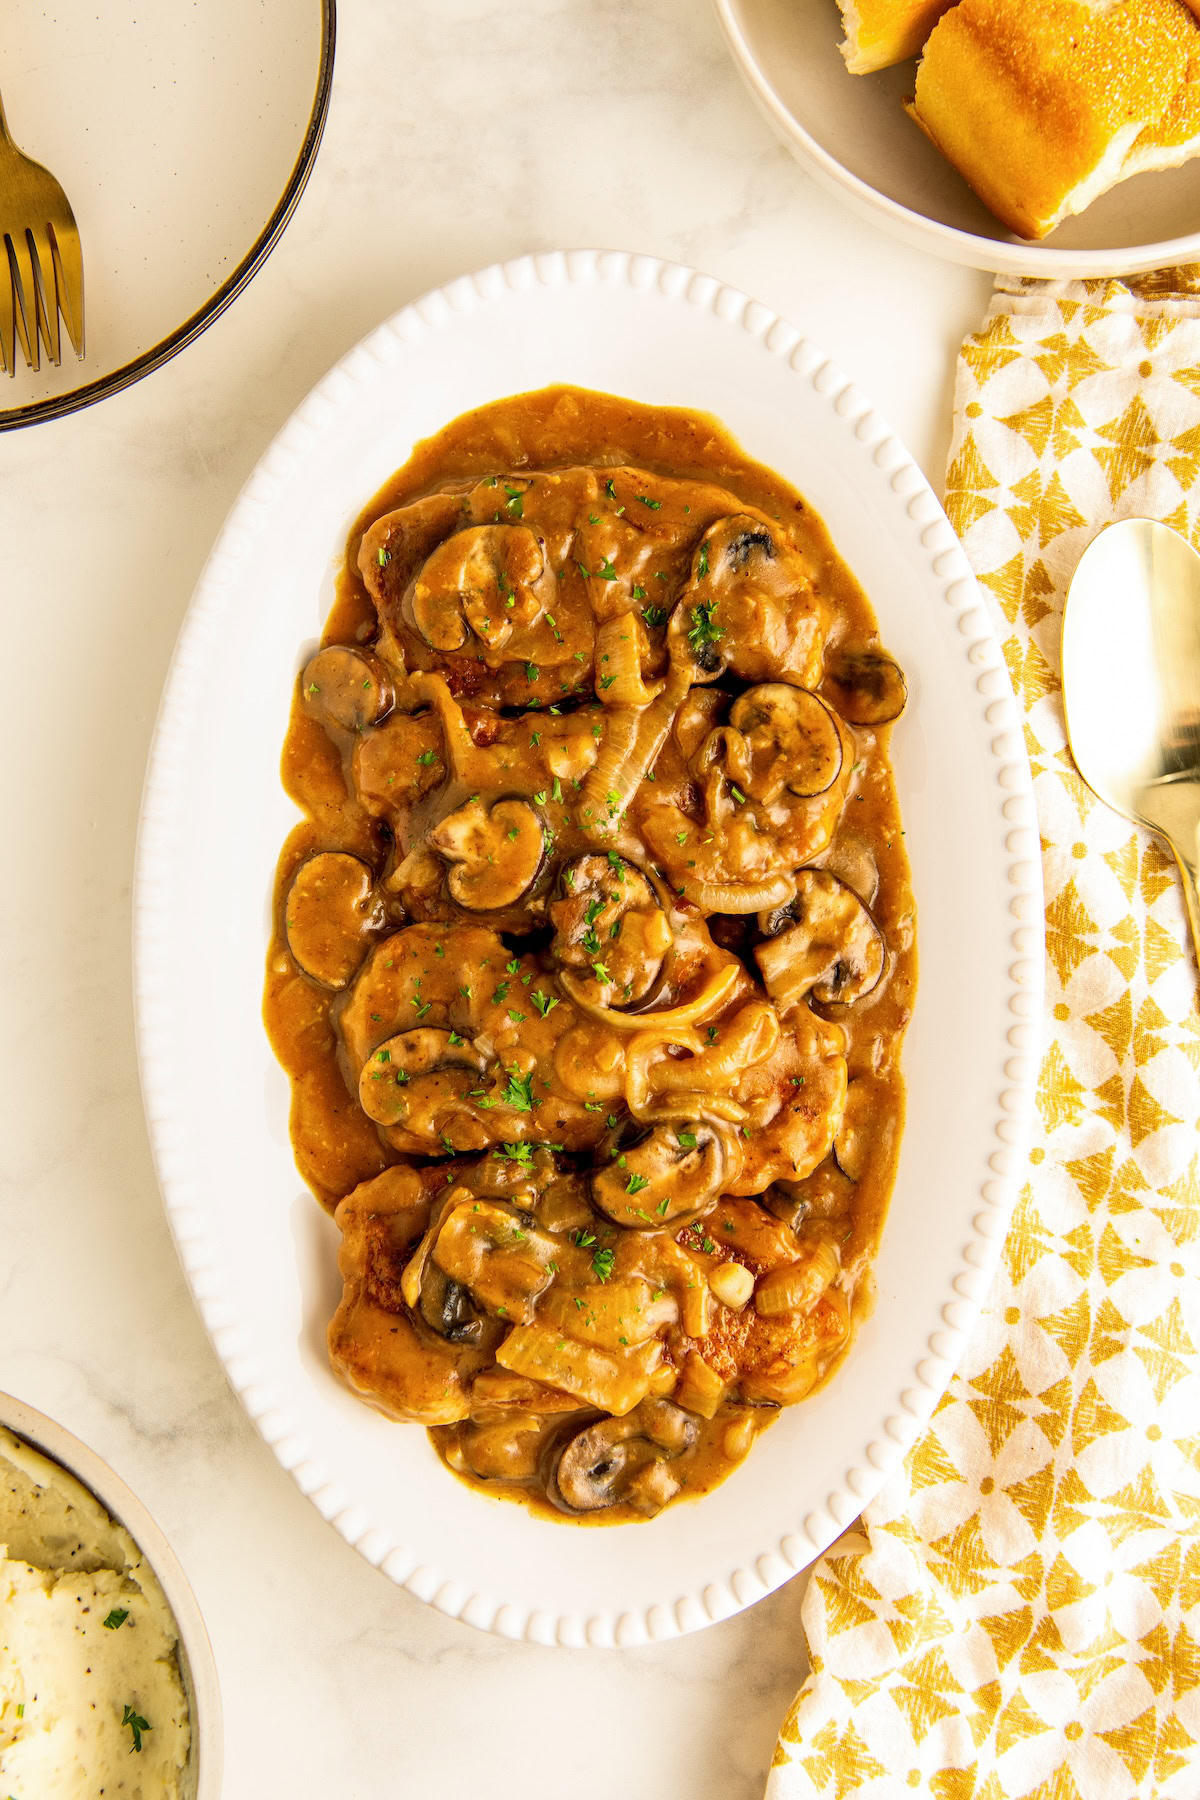 A serving plate filled with tender smothered pork chops with mushroom gravy topped with chopped fresh herbs.